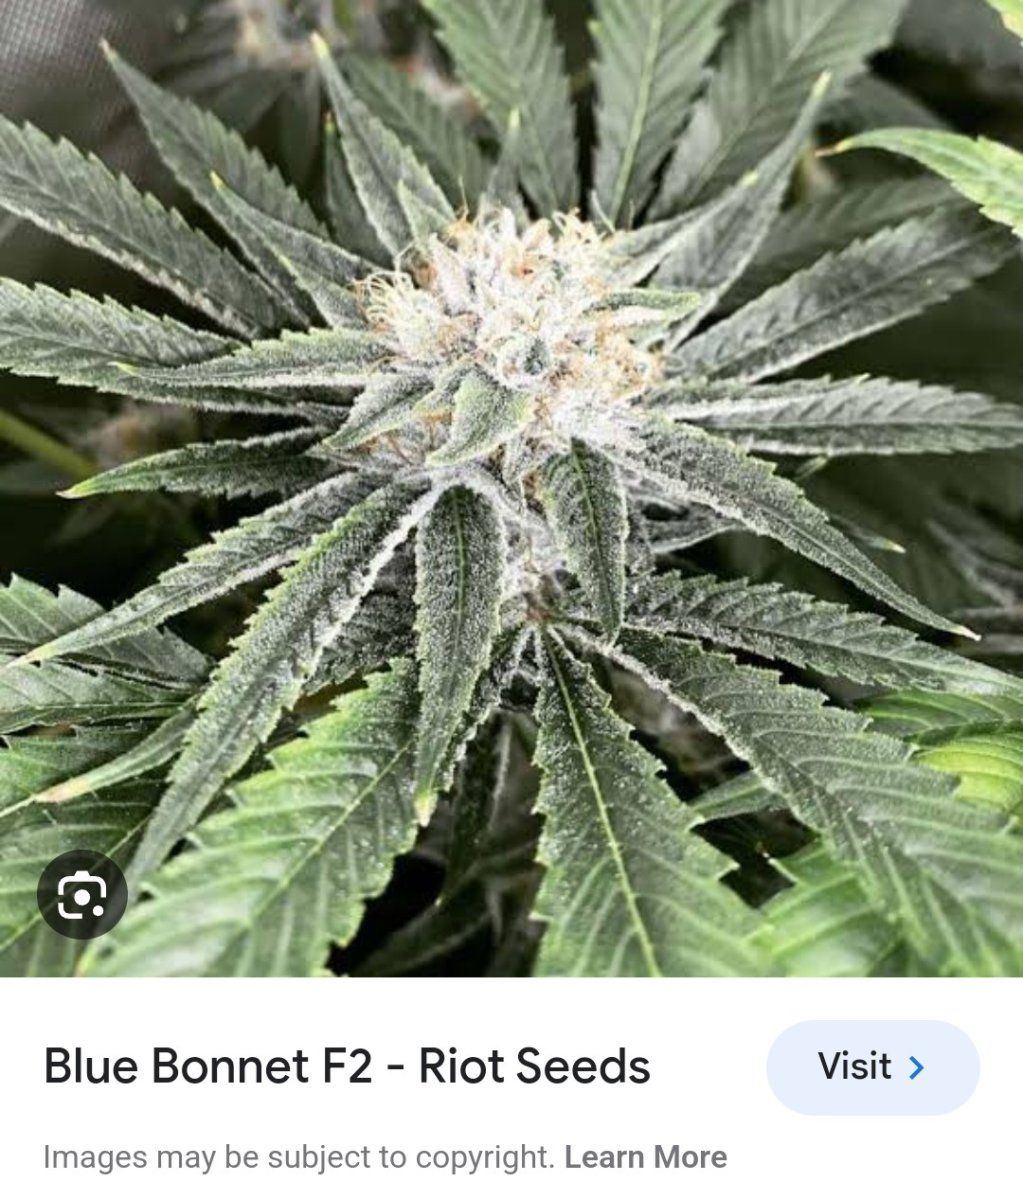 Let me get this straight f1 x f1 seed phenotypes sort into 4 phenotypes 2